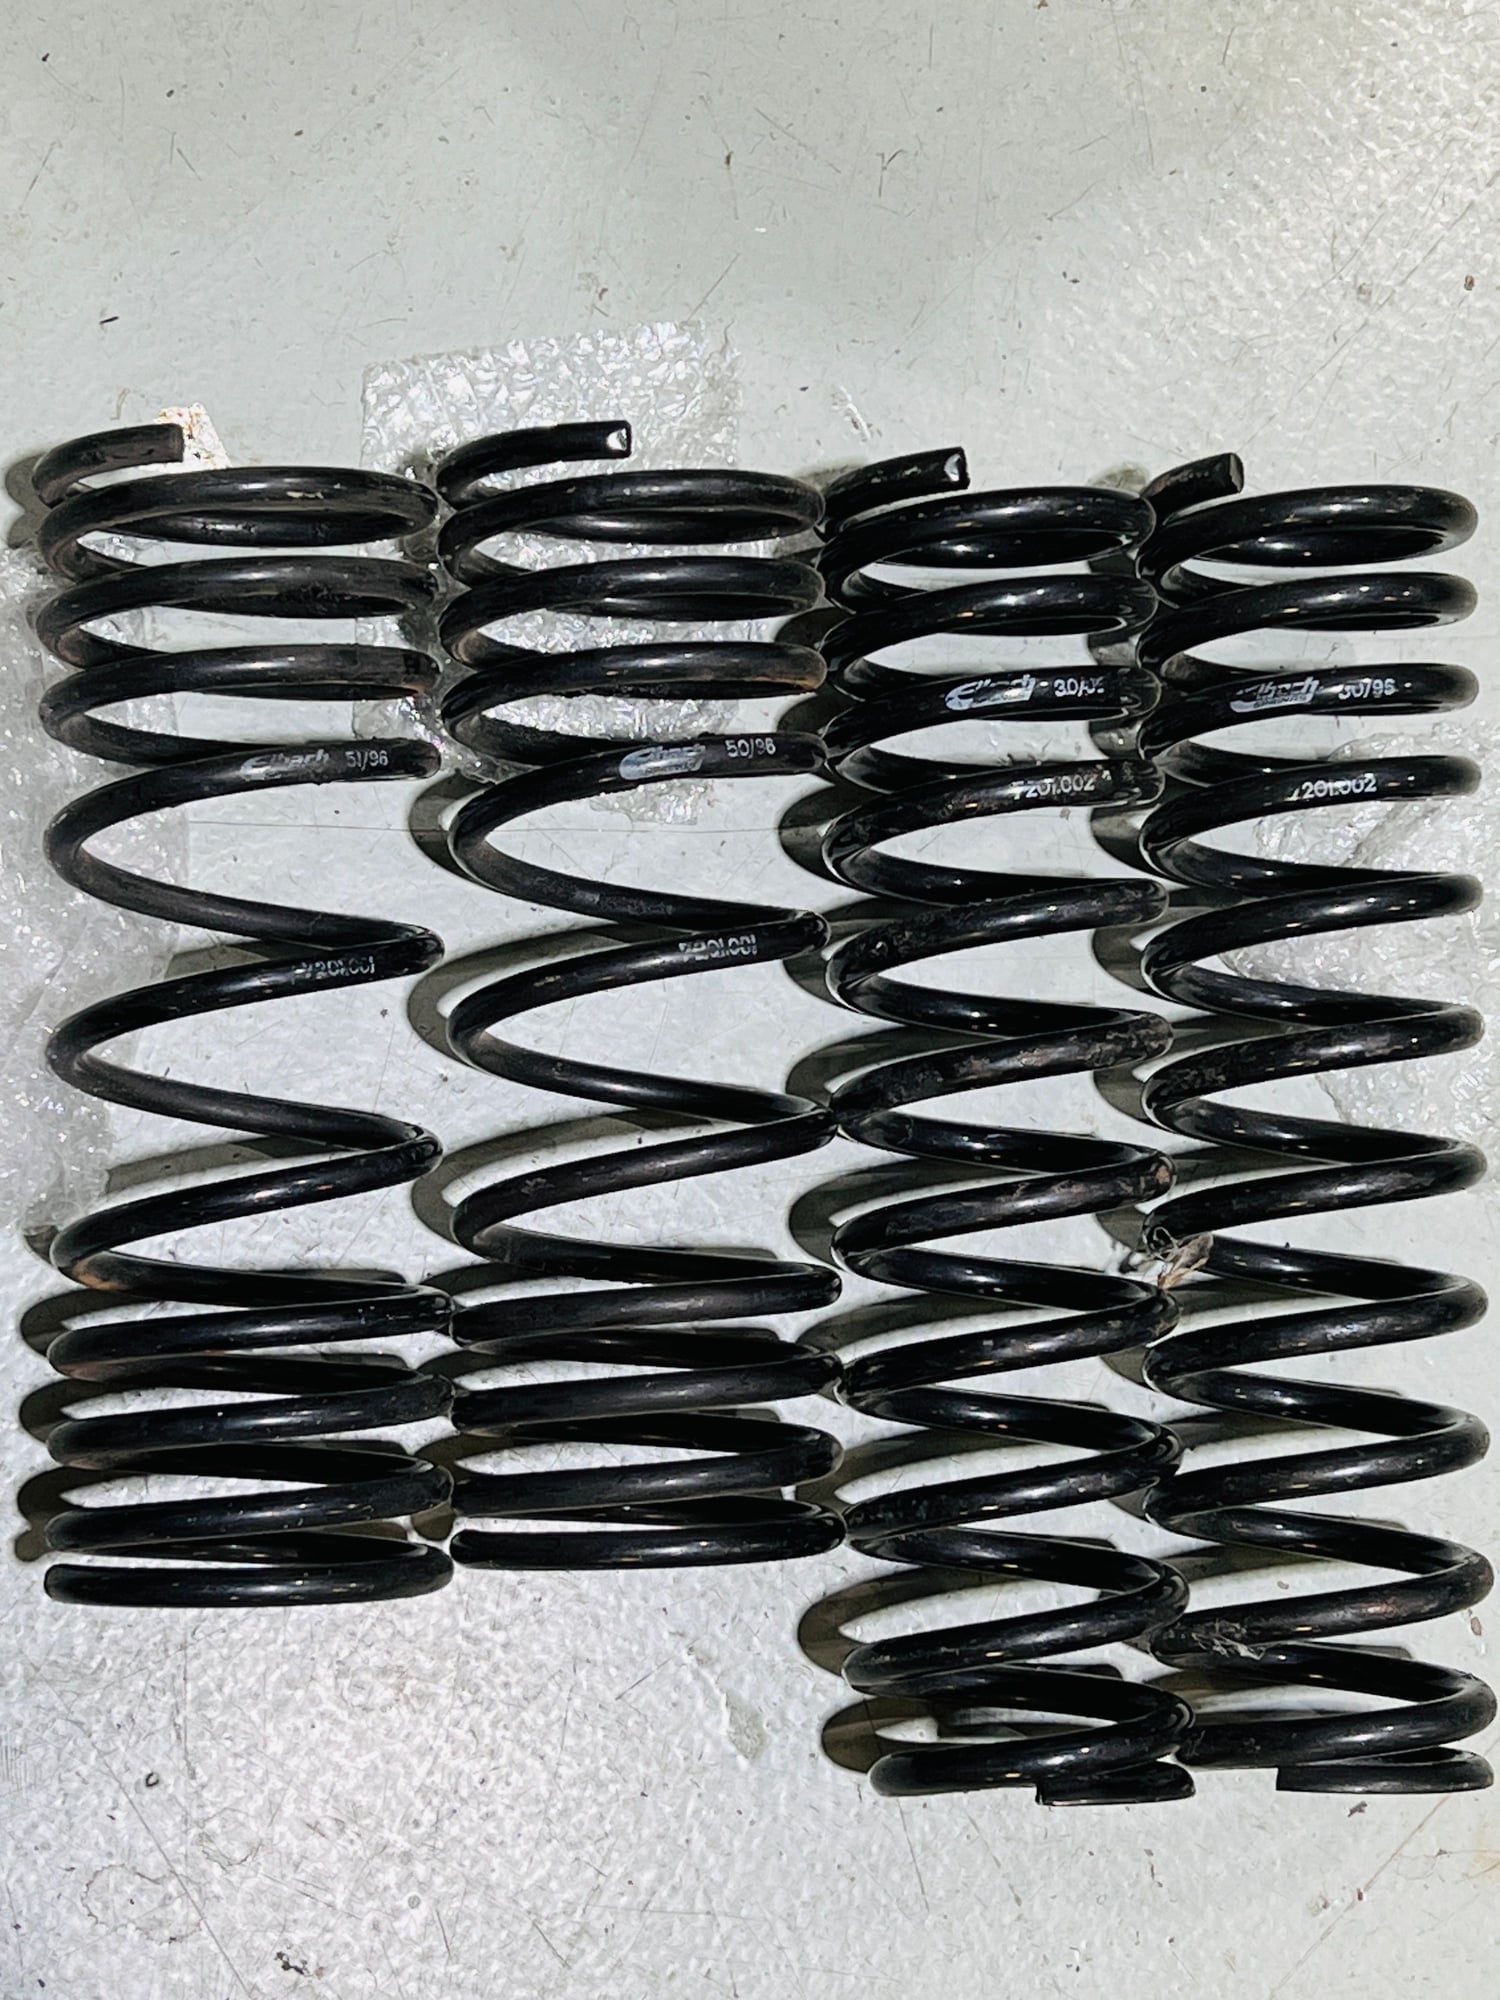 Steering/Suspension - Eibach Pro-Kit Lowering Springs set 964 / 911 from 1990 - 1994 used - Used - Houston, TX 77031, United States